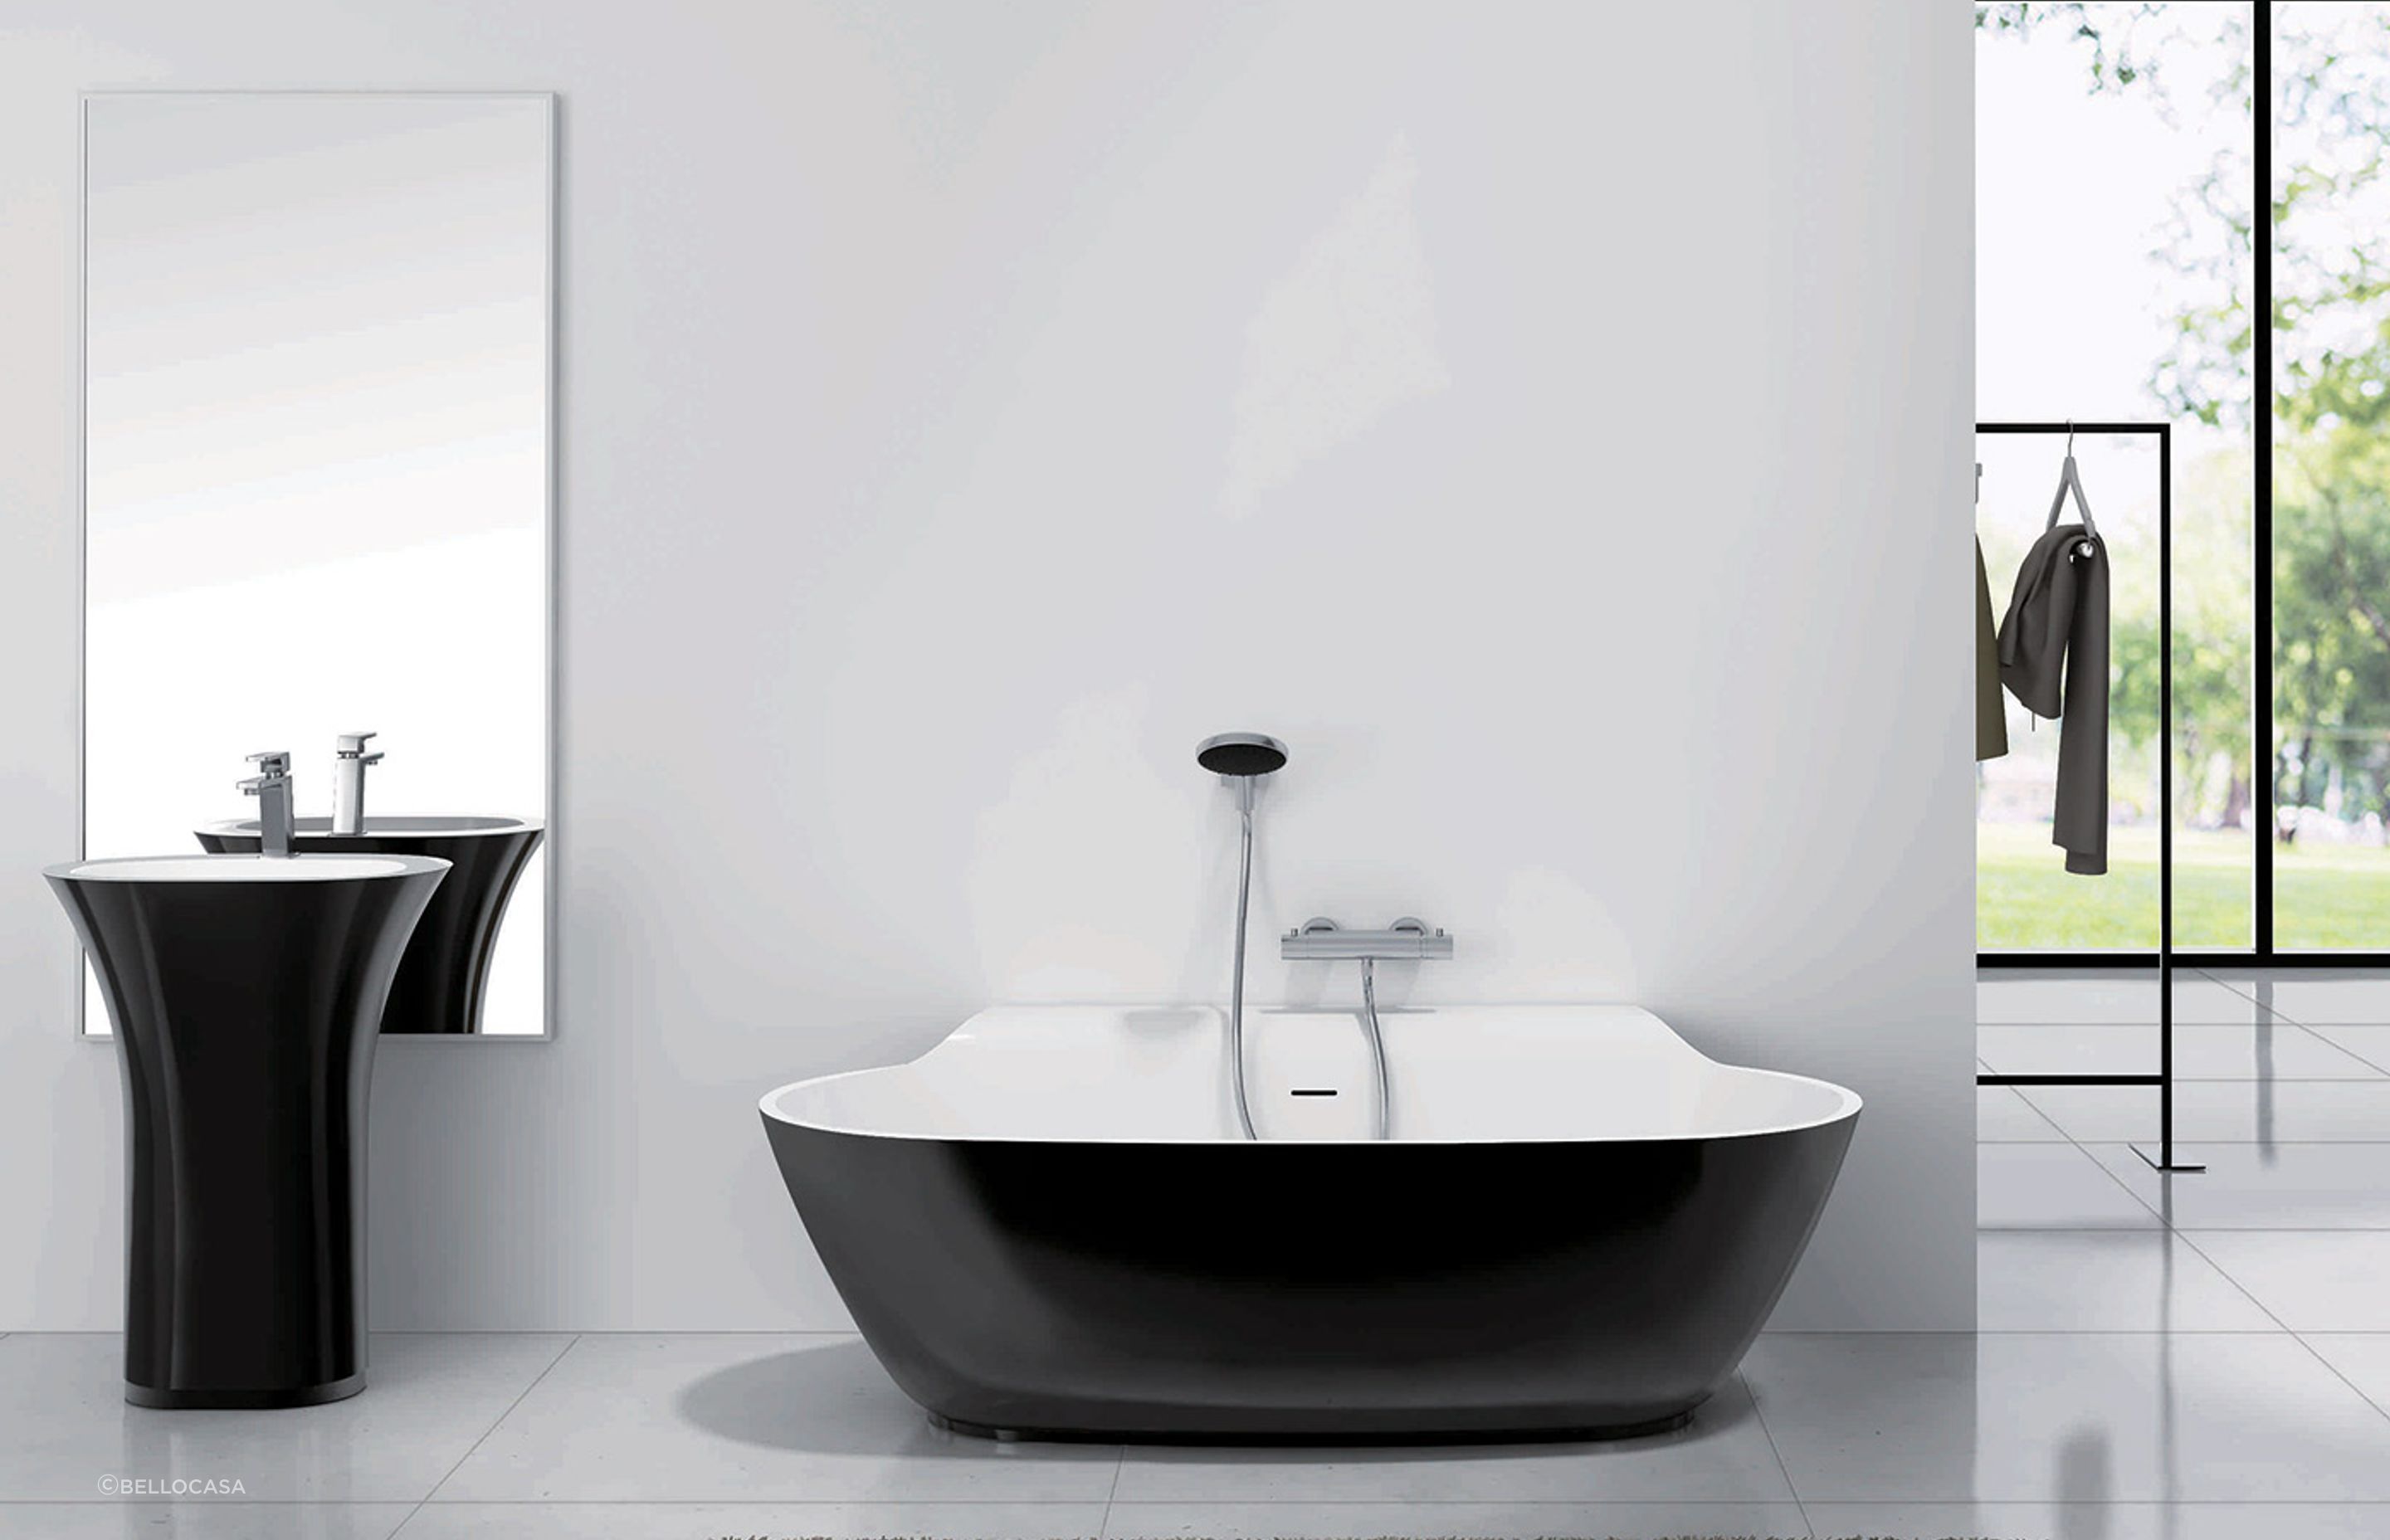 The back to wall shelf design of the Alice Back to Wall Bath by BelloCasa provides a handy place to rest arms or glasses